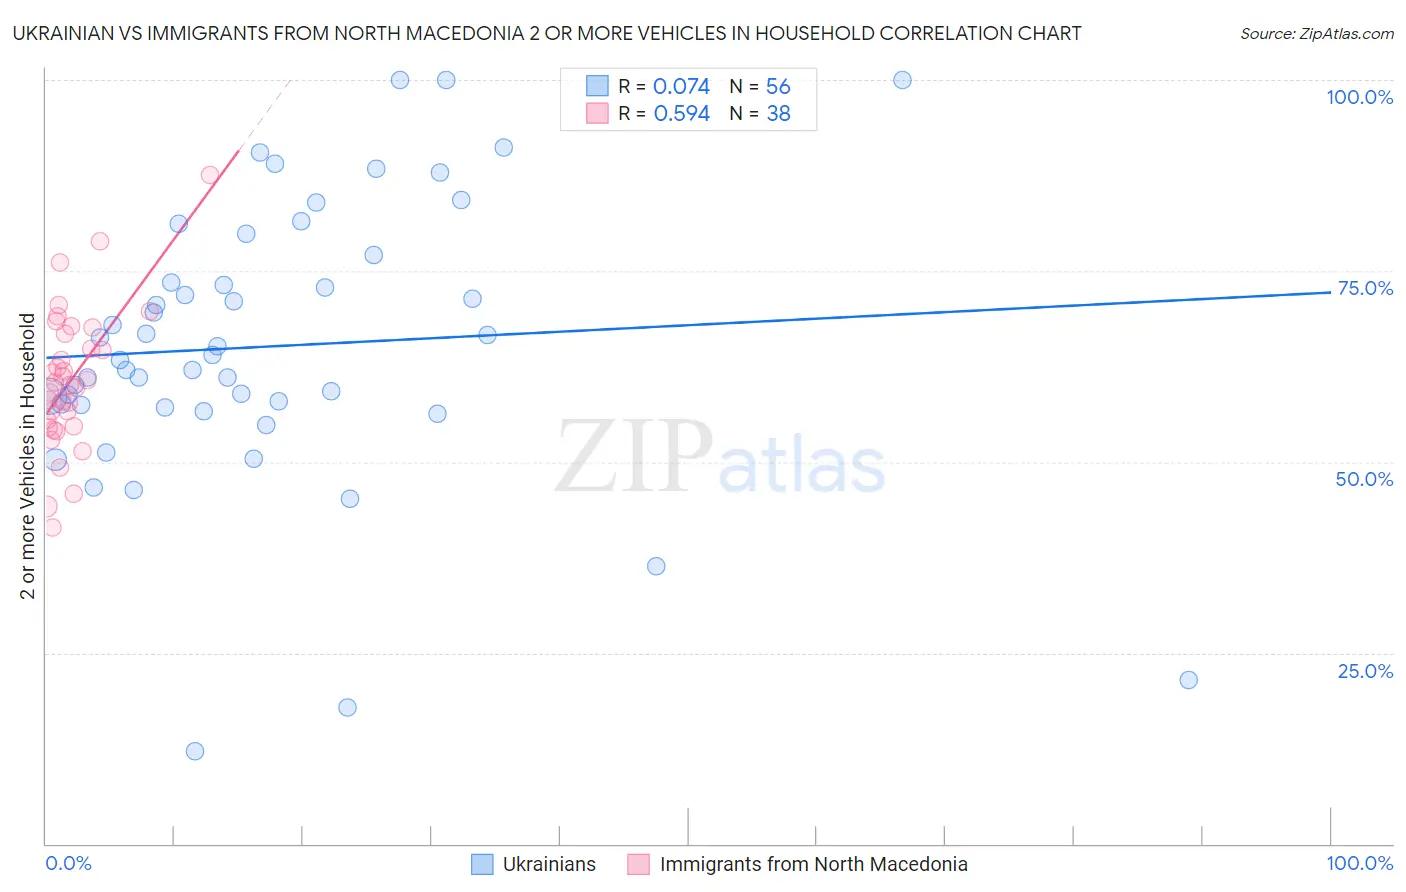 Ukrainian vs Immigrants from North Macedonia 2 or more Vehicles in Household